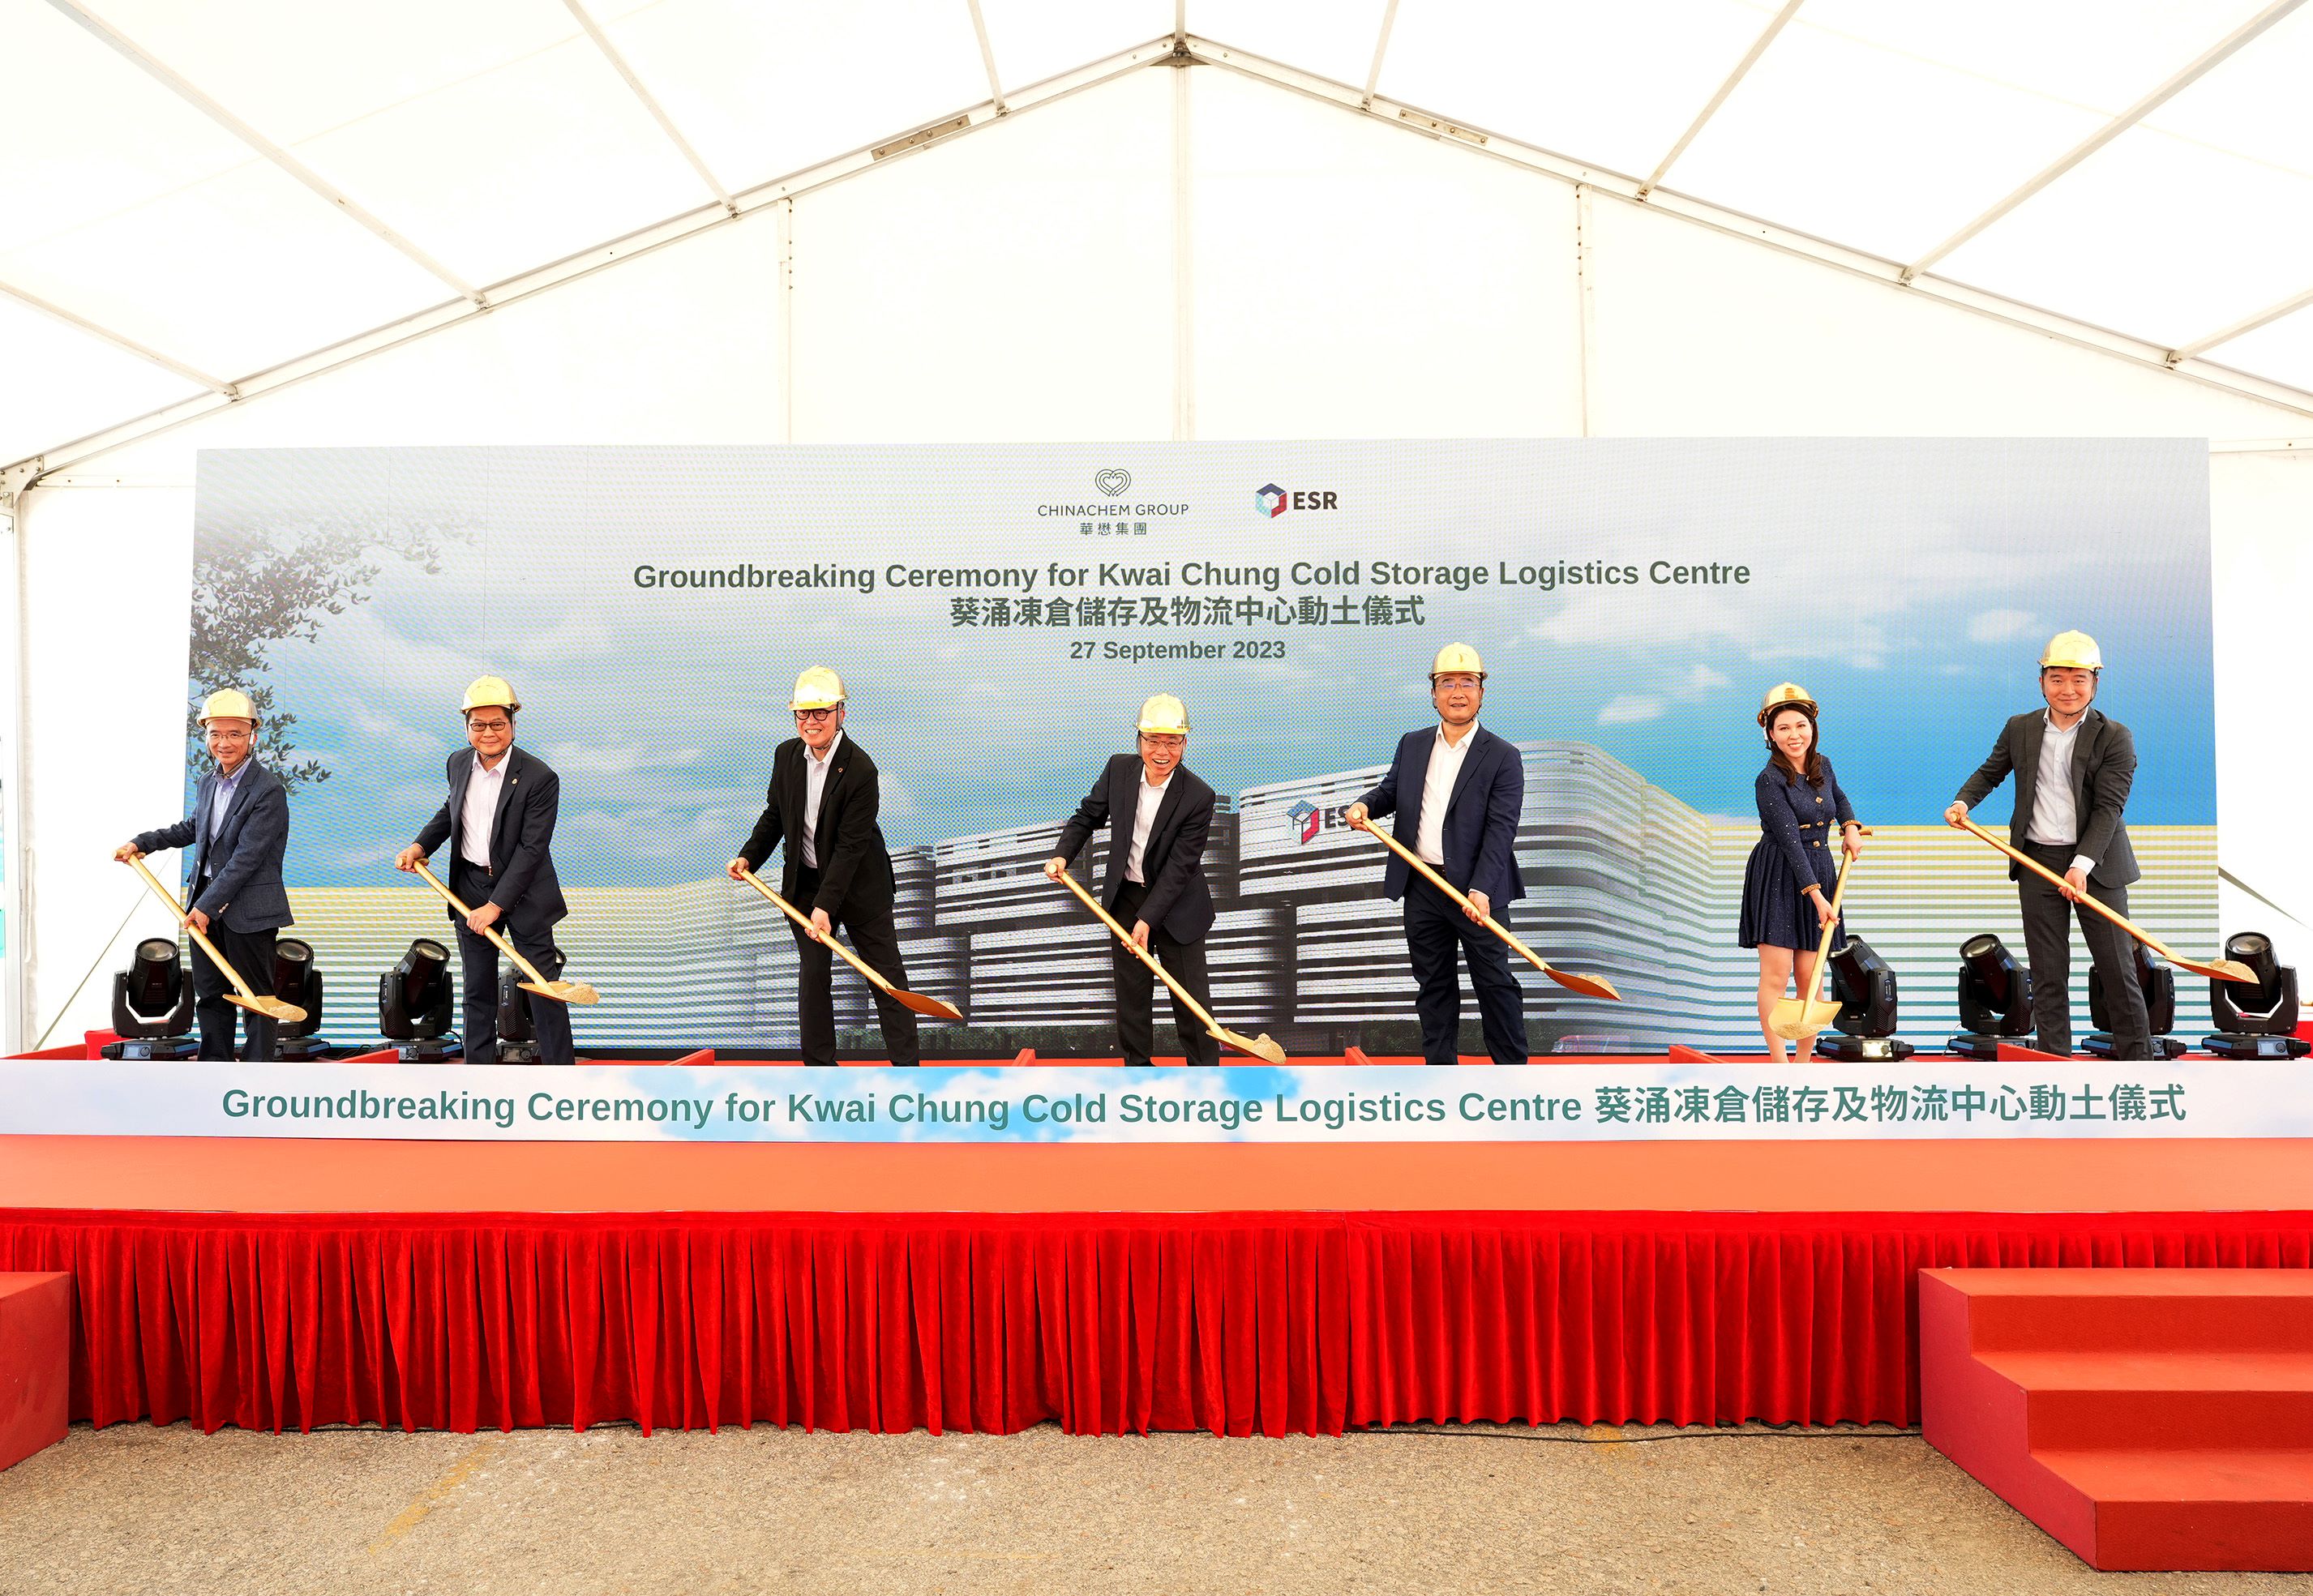 ESR Group Limited, in partnership with Chinachem Group, held a groundbreaking ceremony today to initiate the development of a cutting-edge prime cold storage and logistics facility in Kwai Chung. Distinguished guests of honour at the groundbreaking ceremony include Lam Sai Hung (centre), Secretary for Transport and Logistics; Jeffrey Shen (third from the right), ESR Group Co-founder and Co-CEO; and Donald Choi (third from the left), Executive Director and CEO of Chinachem Group. This marks the commencement of Hong Kong’s largest cold storage project in the past 20 years. The second and first from the left are Chinachem Group’s Executive Director and CFO Ricky Tsang and Managing Director, Corporate Development Damien Wu, while the second and first from the right are Chang Rui Hua, Managing Director, Business Management and Investment, ESR Hong Kong; and Allan Wang, Group Treasury Senior Director, ESR Group.